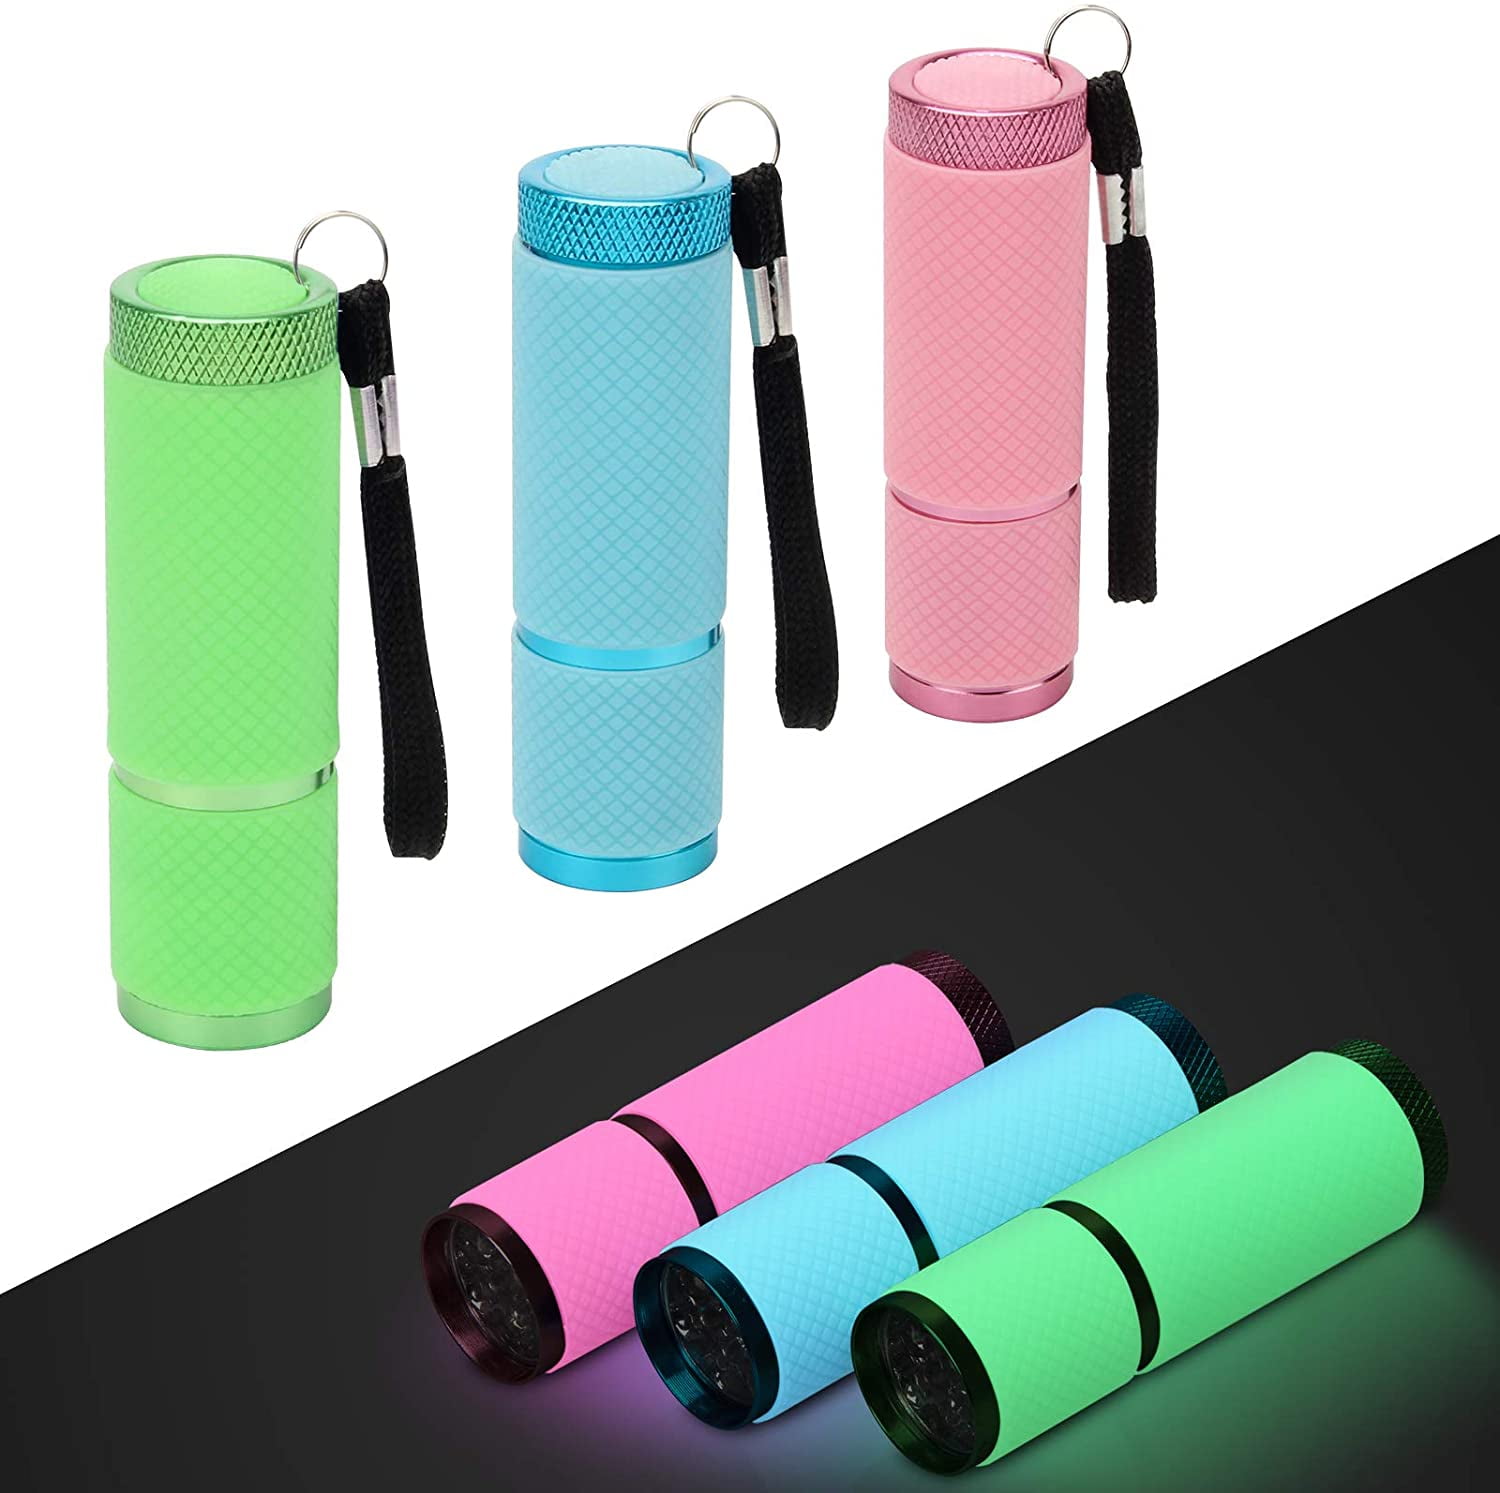 New 9 LED On/Off Rubber Torch With Wrist Strap Outdoor Expeditions or Camping 